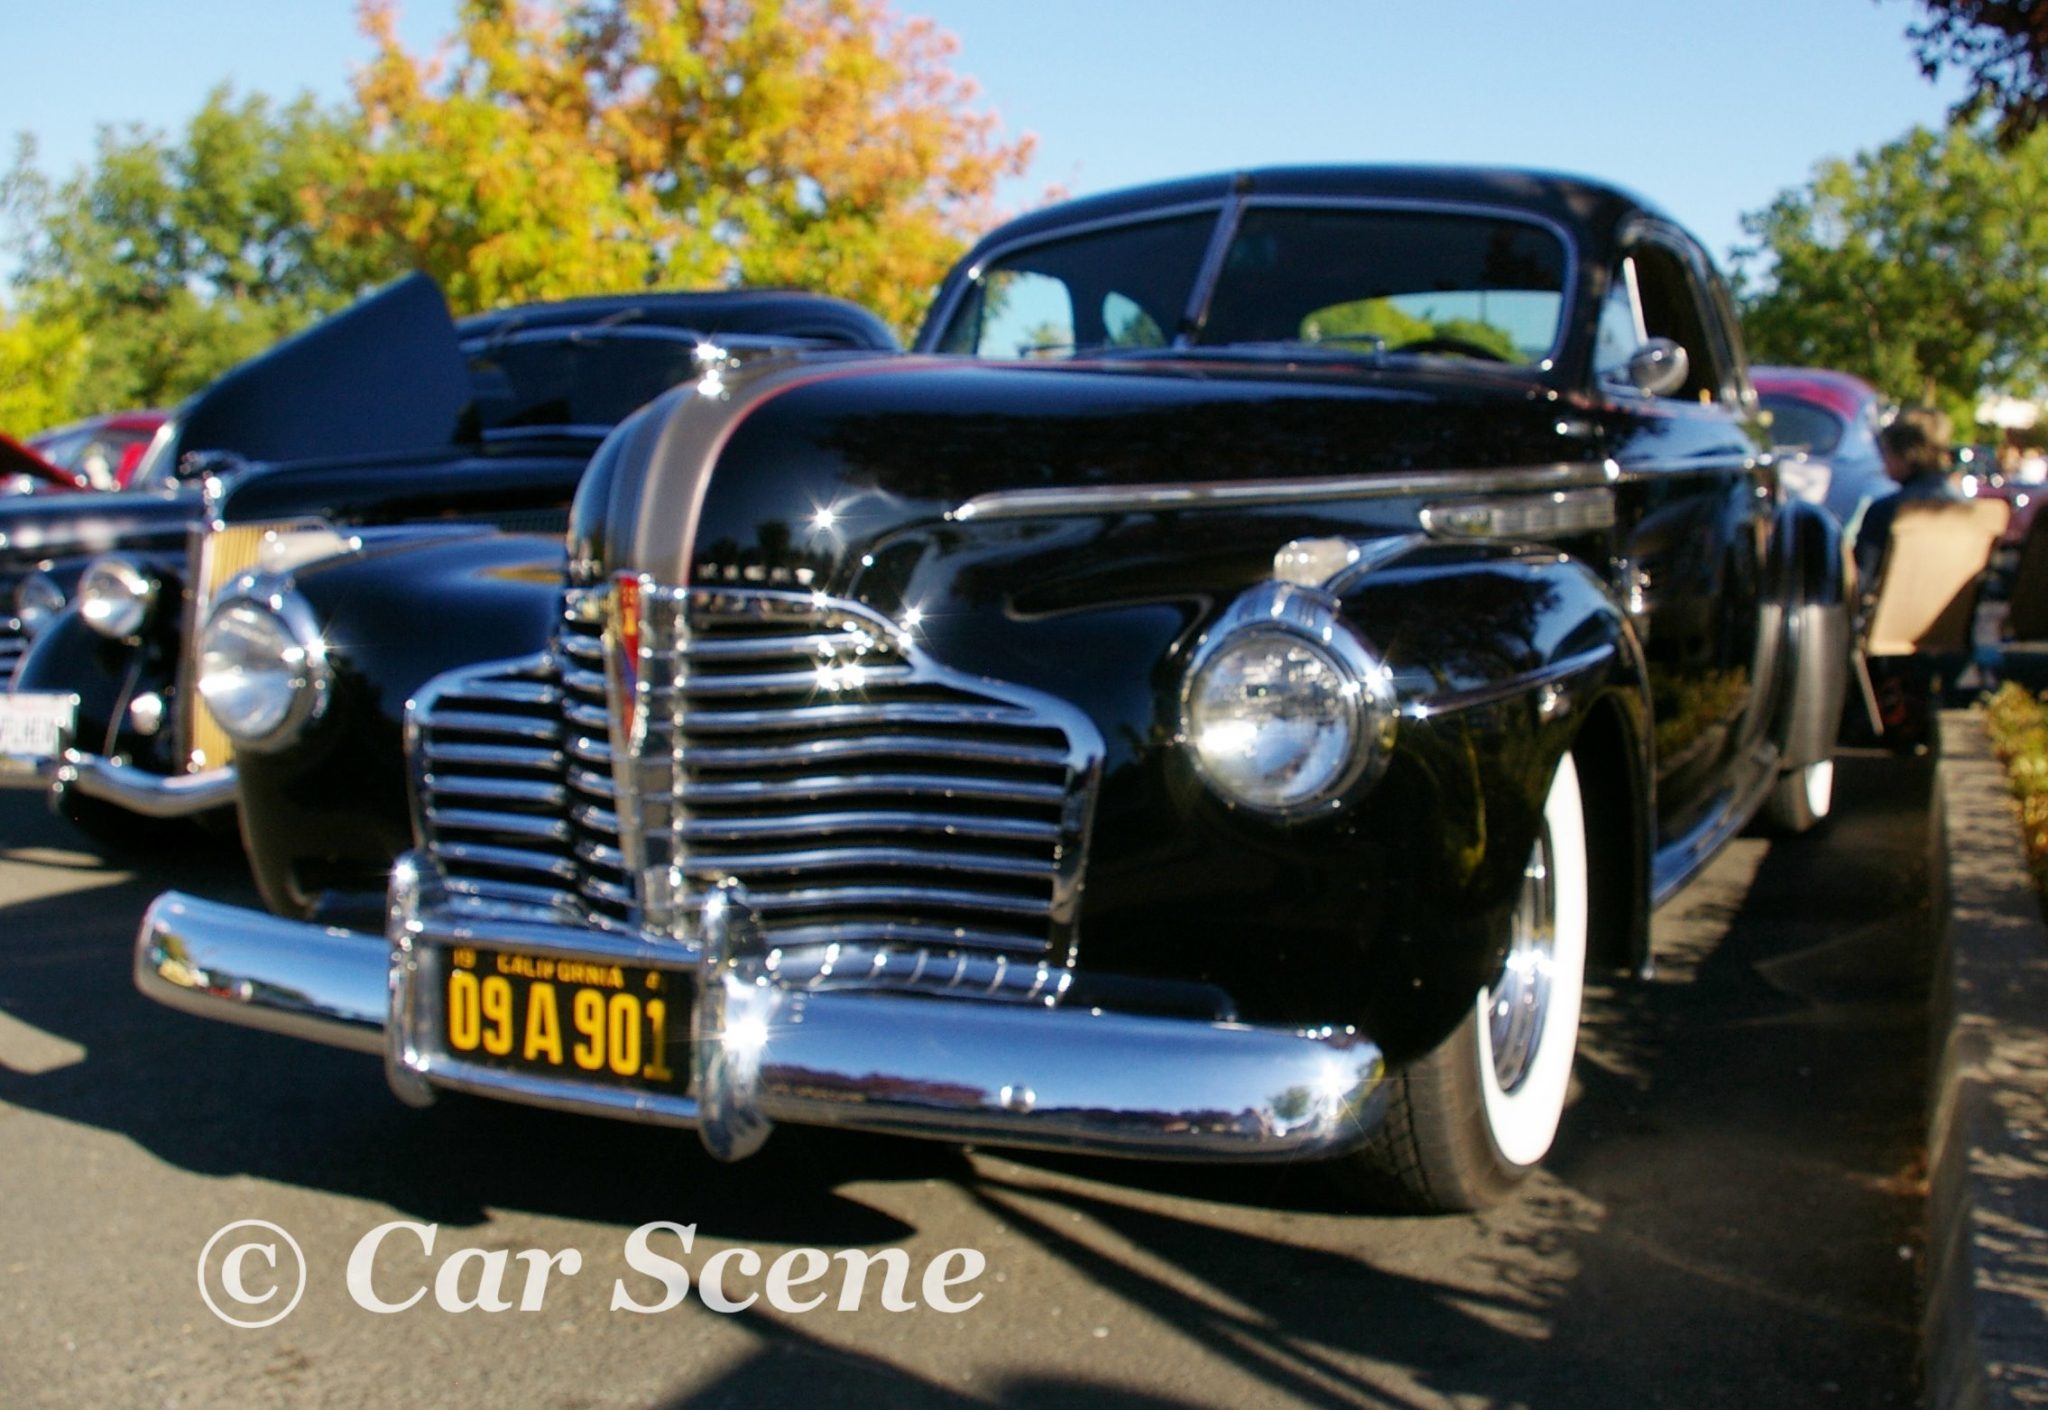 1941 buick Eight Sedanette front view